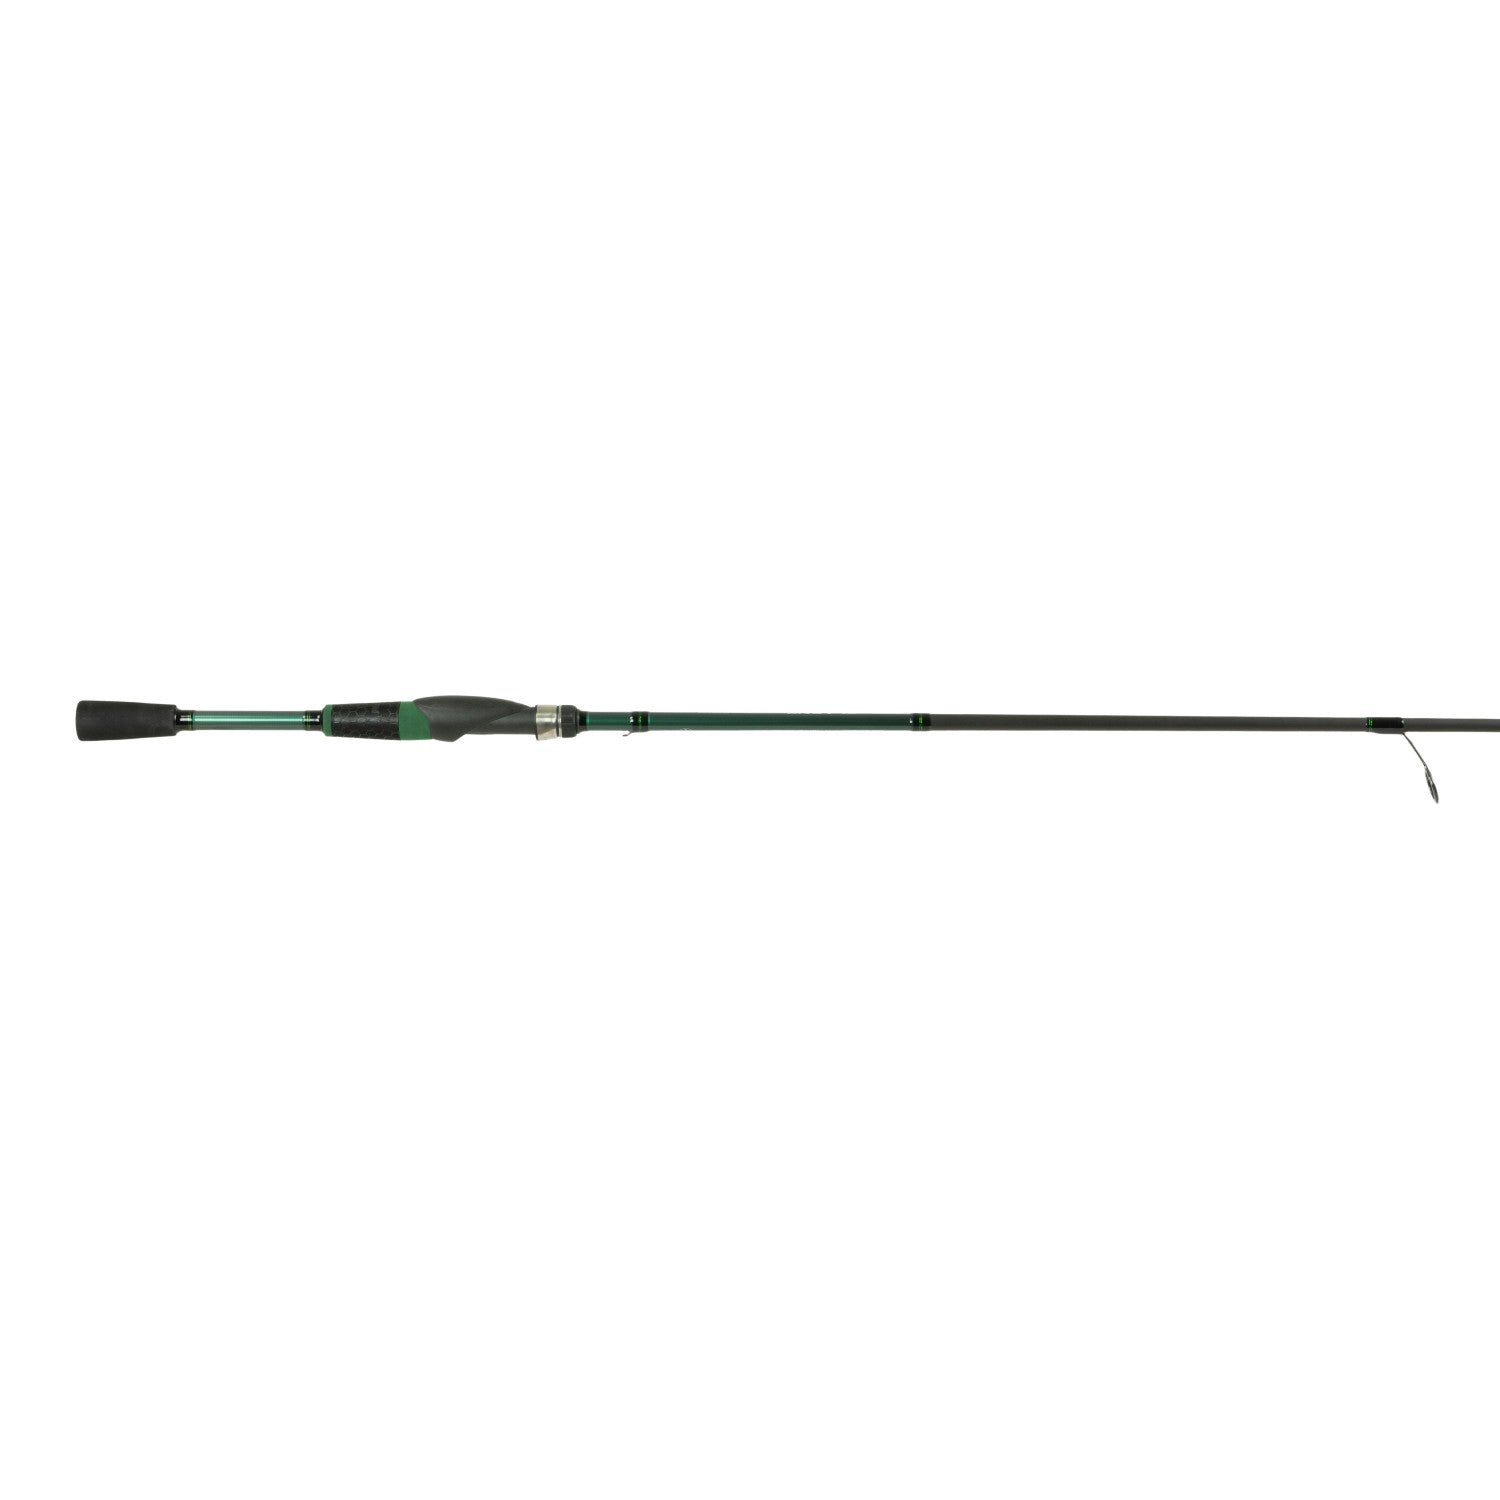 GRIZZLY ELITE DEAD RINGER RODS TROLLING SERIES CRAPPIE POLE ROD DRR16-3 16'  3PC